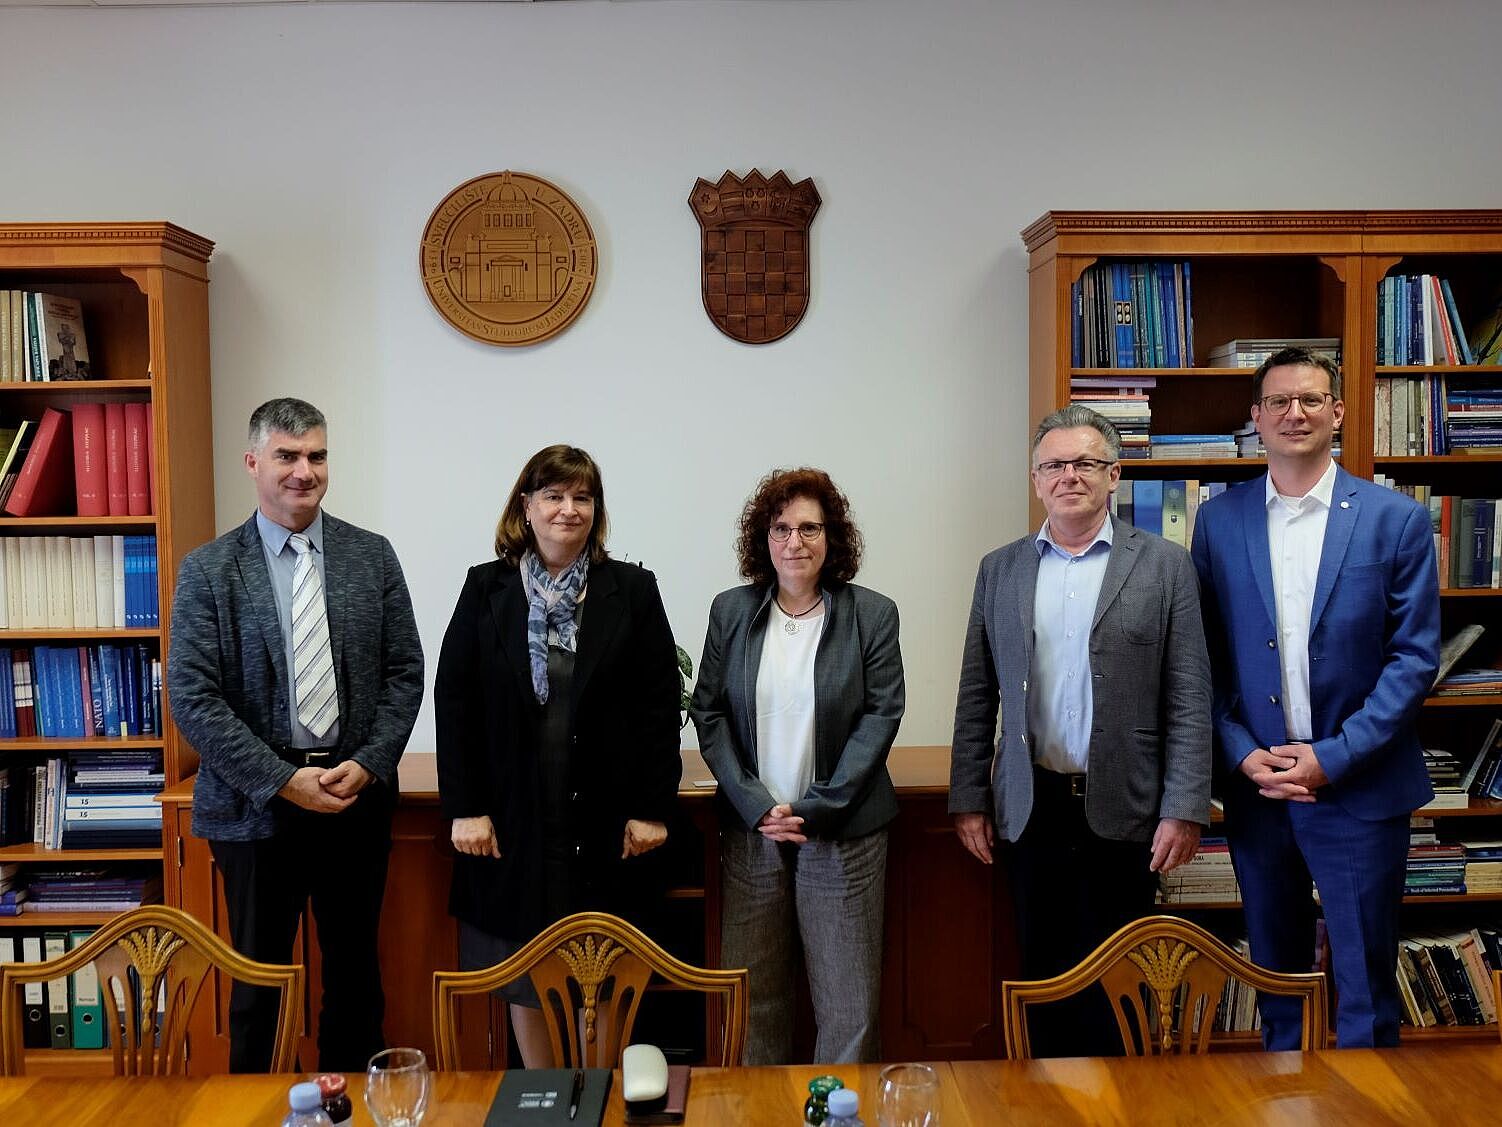 In conversation with the Rectorate of the University of Zadar - From left to right: Prof. Dr. Josip Faričić (Vice Rector for Development Strategy and Publishing), Prof. Dr. Nedjeljka Balić Nižić (Vice Rector for Studies and Student Affairs), Prof. Dr. Katharina Riedel (Rector), Prof. Dr. Slaven Zjalić (Vice Rector for Institutional Cooperation and Technology Transfer), Thomas Jenssen (Manager of the Office of the Rectorate). © Thomas Jenssen, 2023